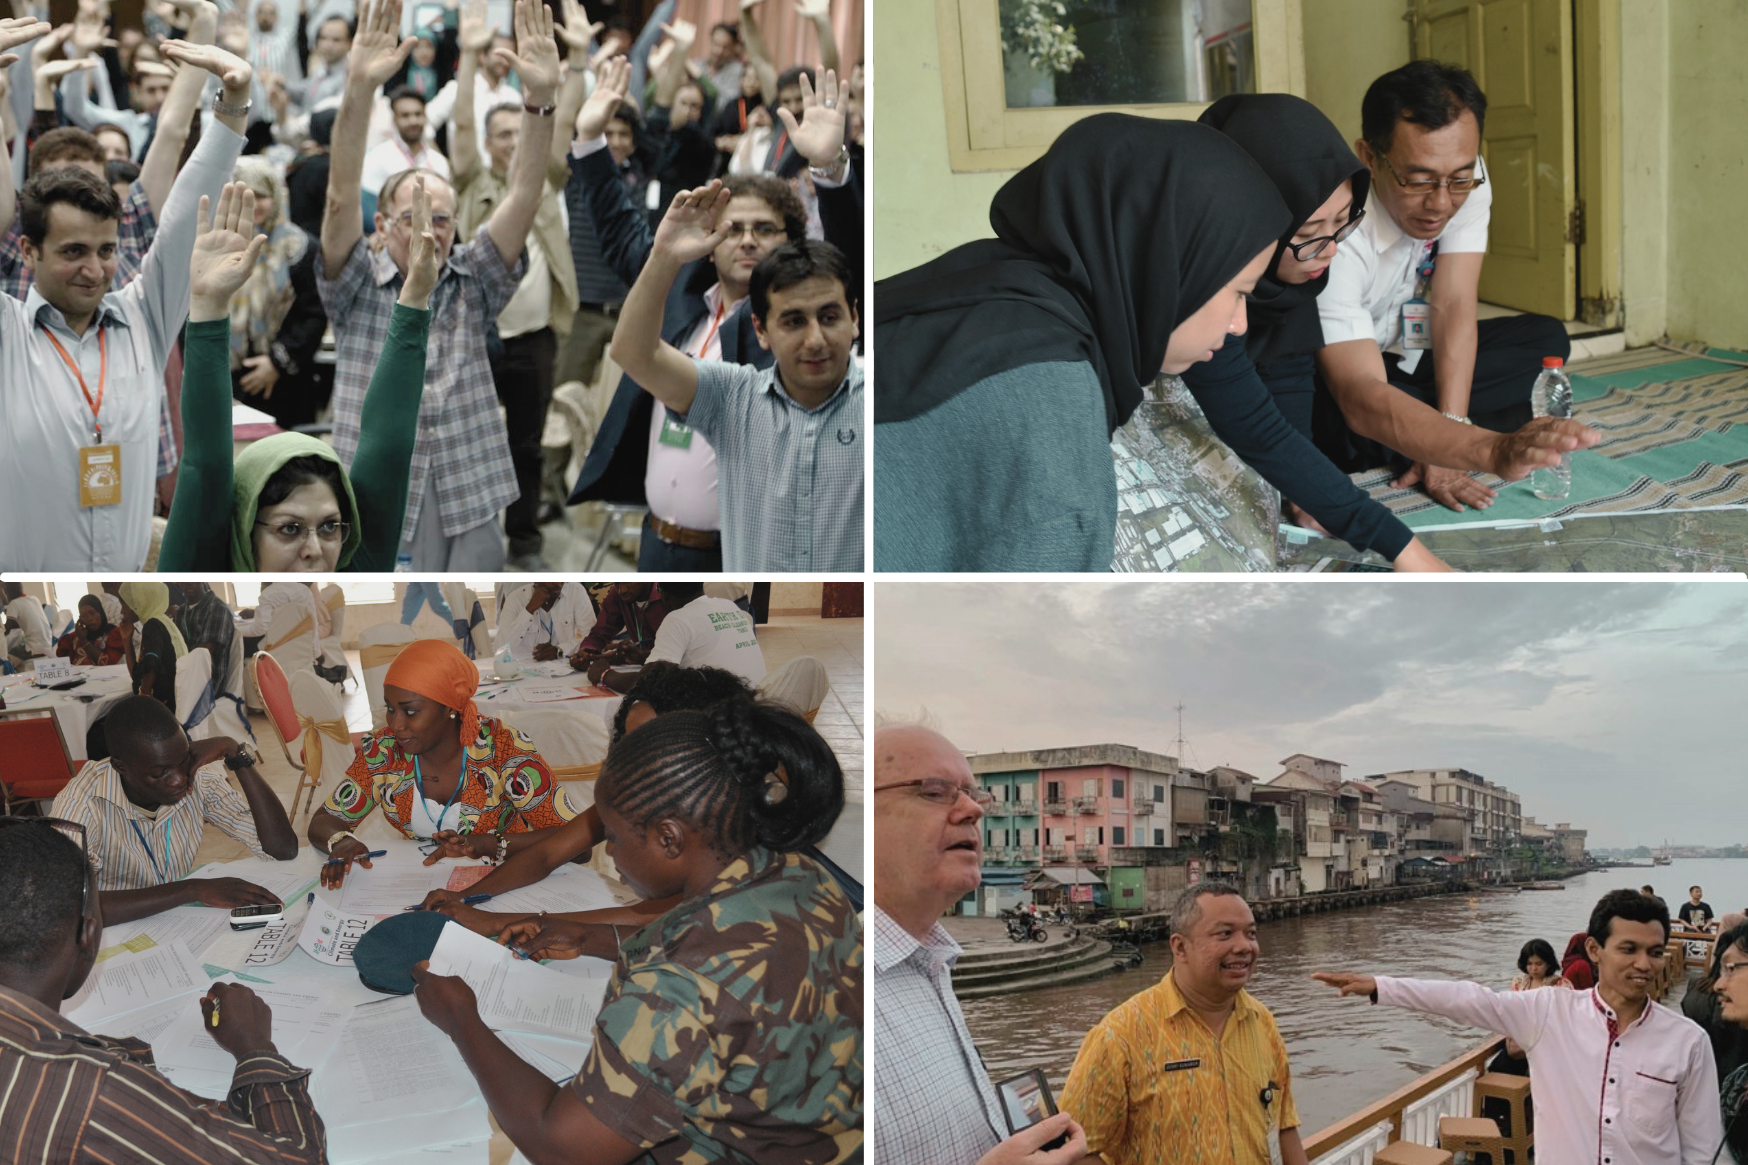 4-photo grid of people raising their hands in a group, two Muslim women and a man talking over document, older women working together, and people standing in front of a river and pointing to buildings talking